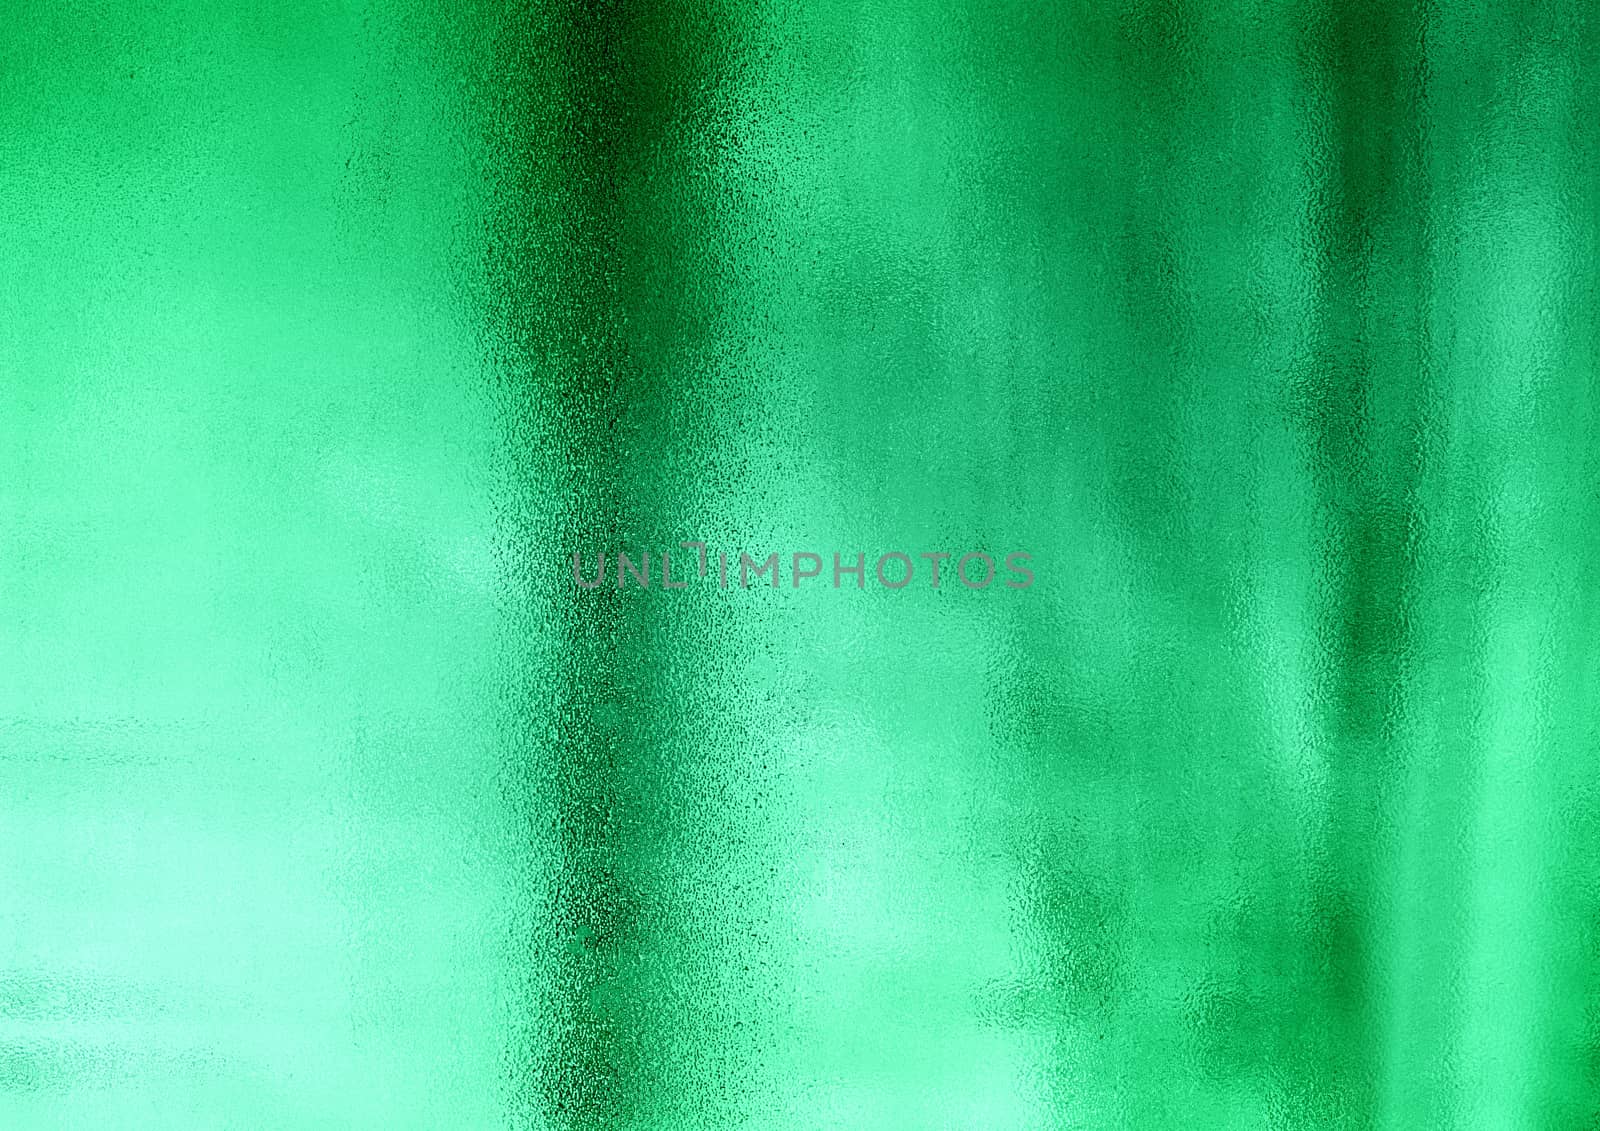 The Christmas green shinny abstract copper textured background